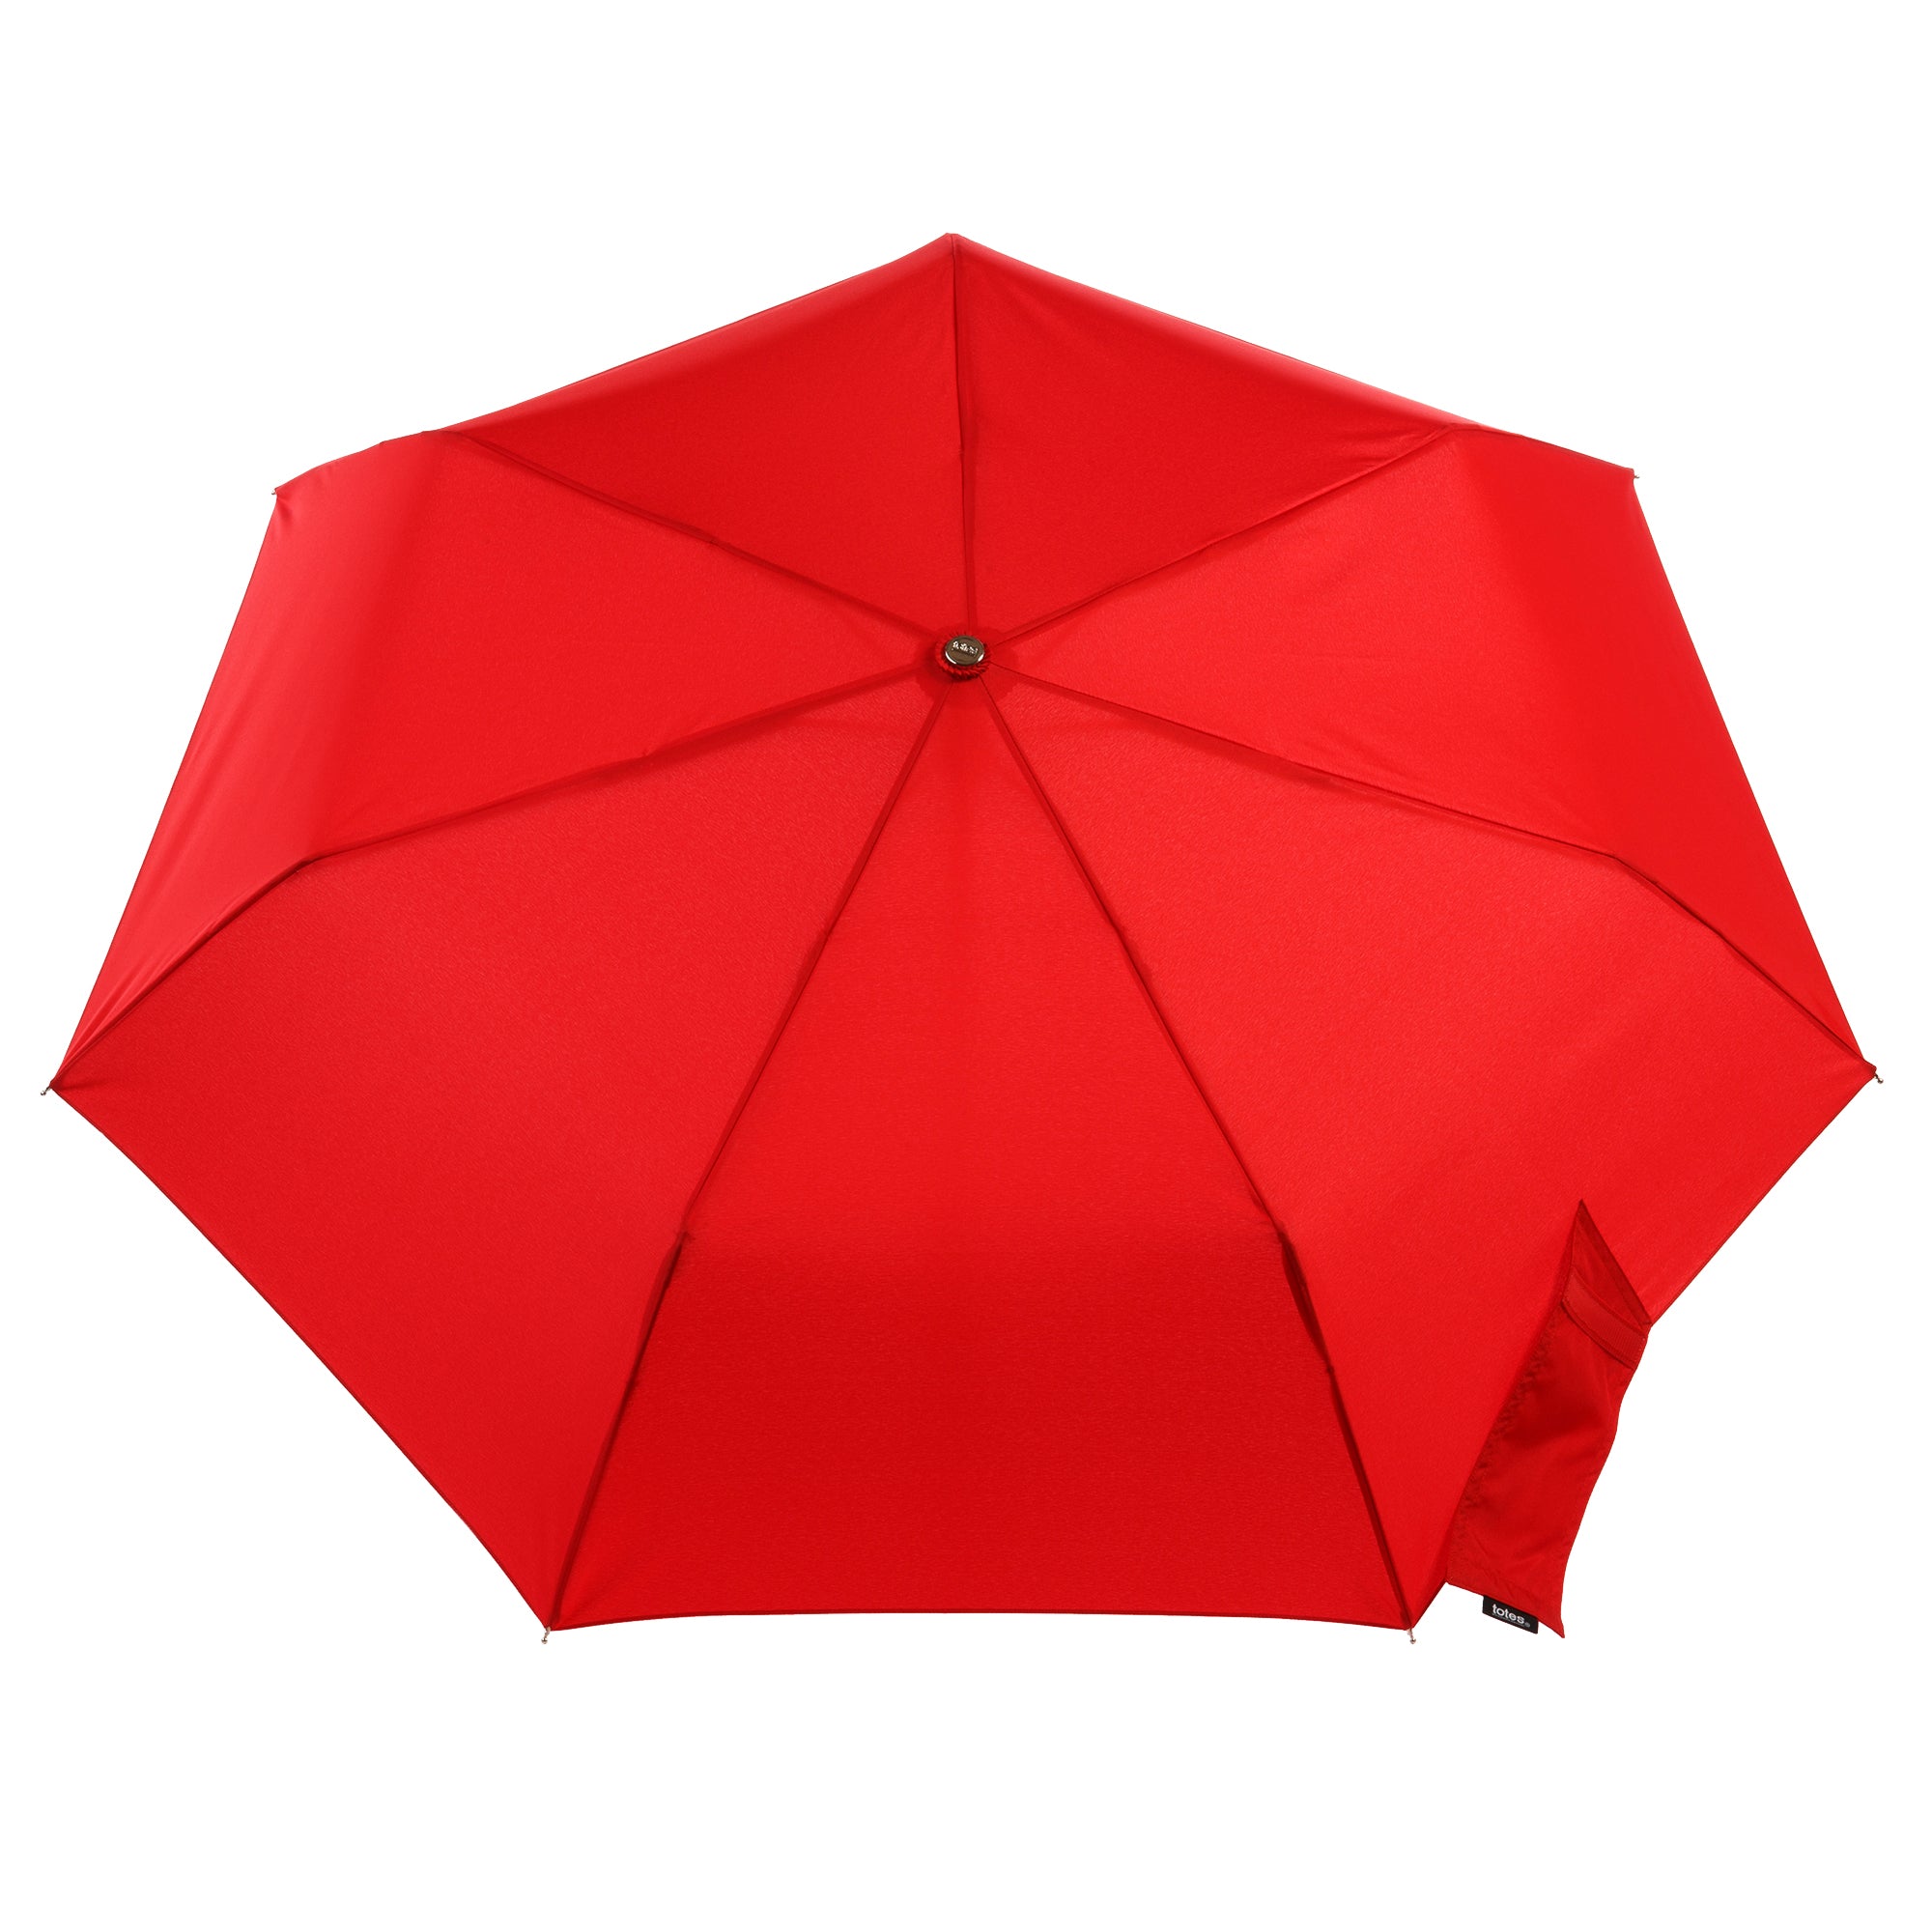 Recycled Titan® Umbrella with Auto Open Close Technology